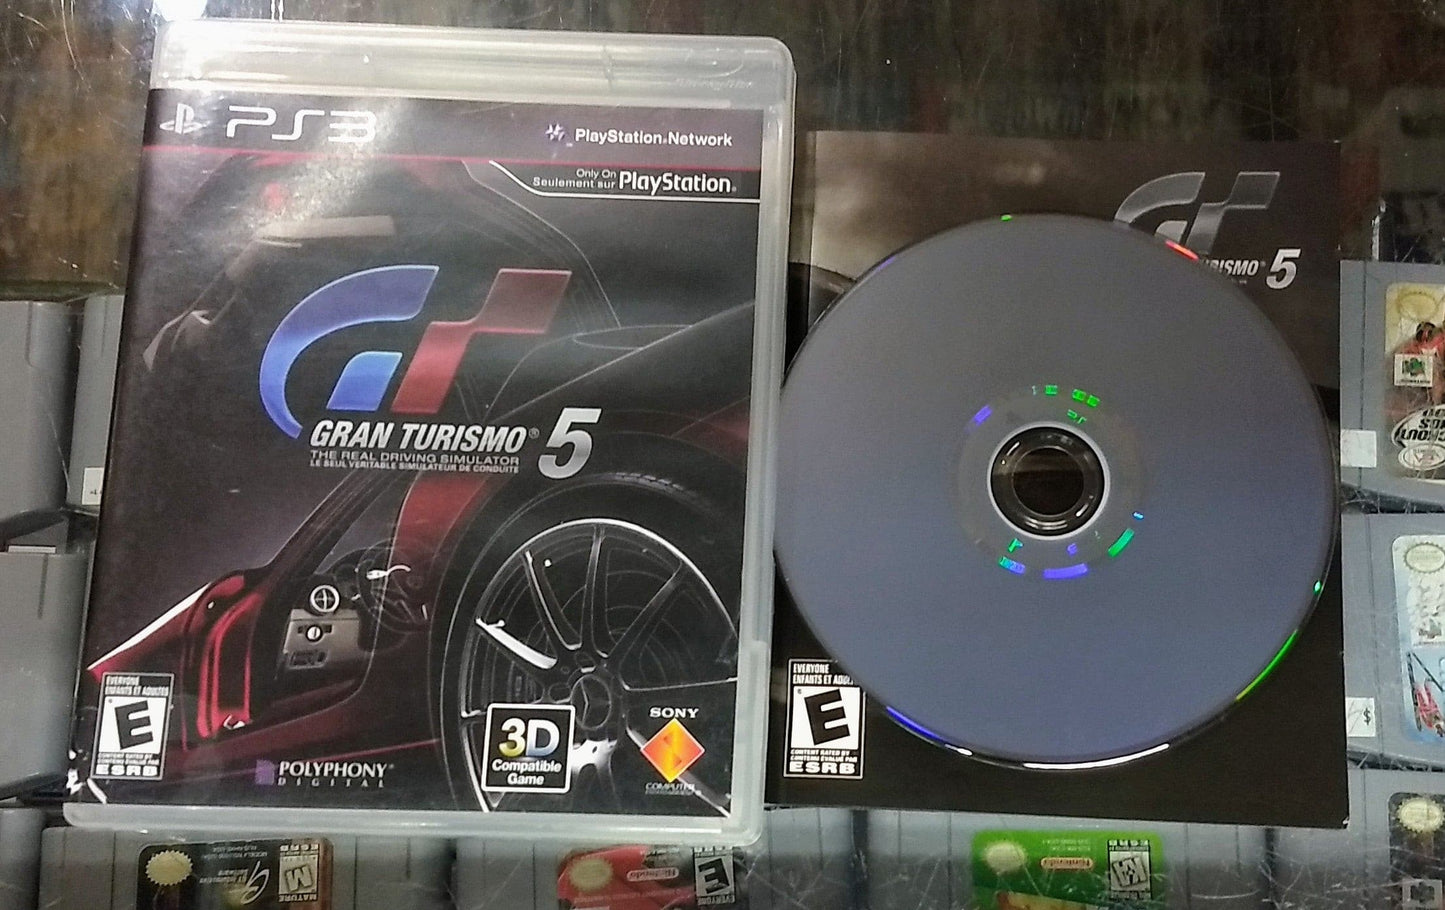 GRAN TURISMO GT 5 (PLAYSTATION 3 PS3) - jeux video game-x